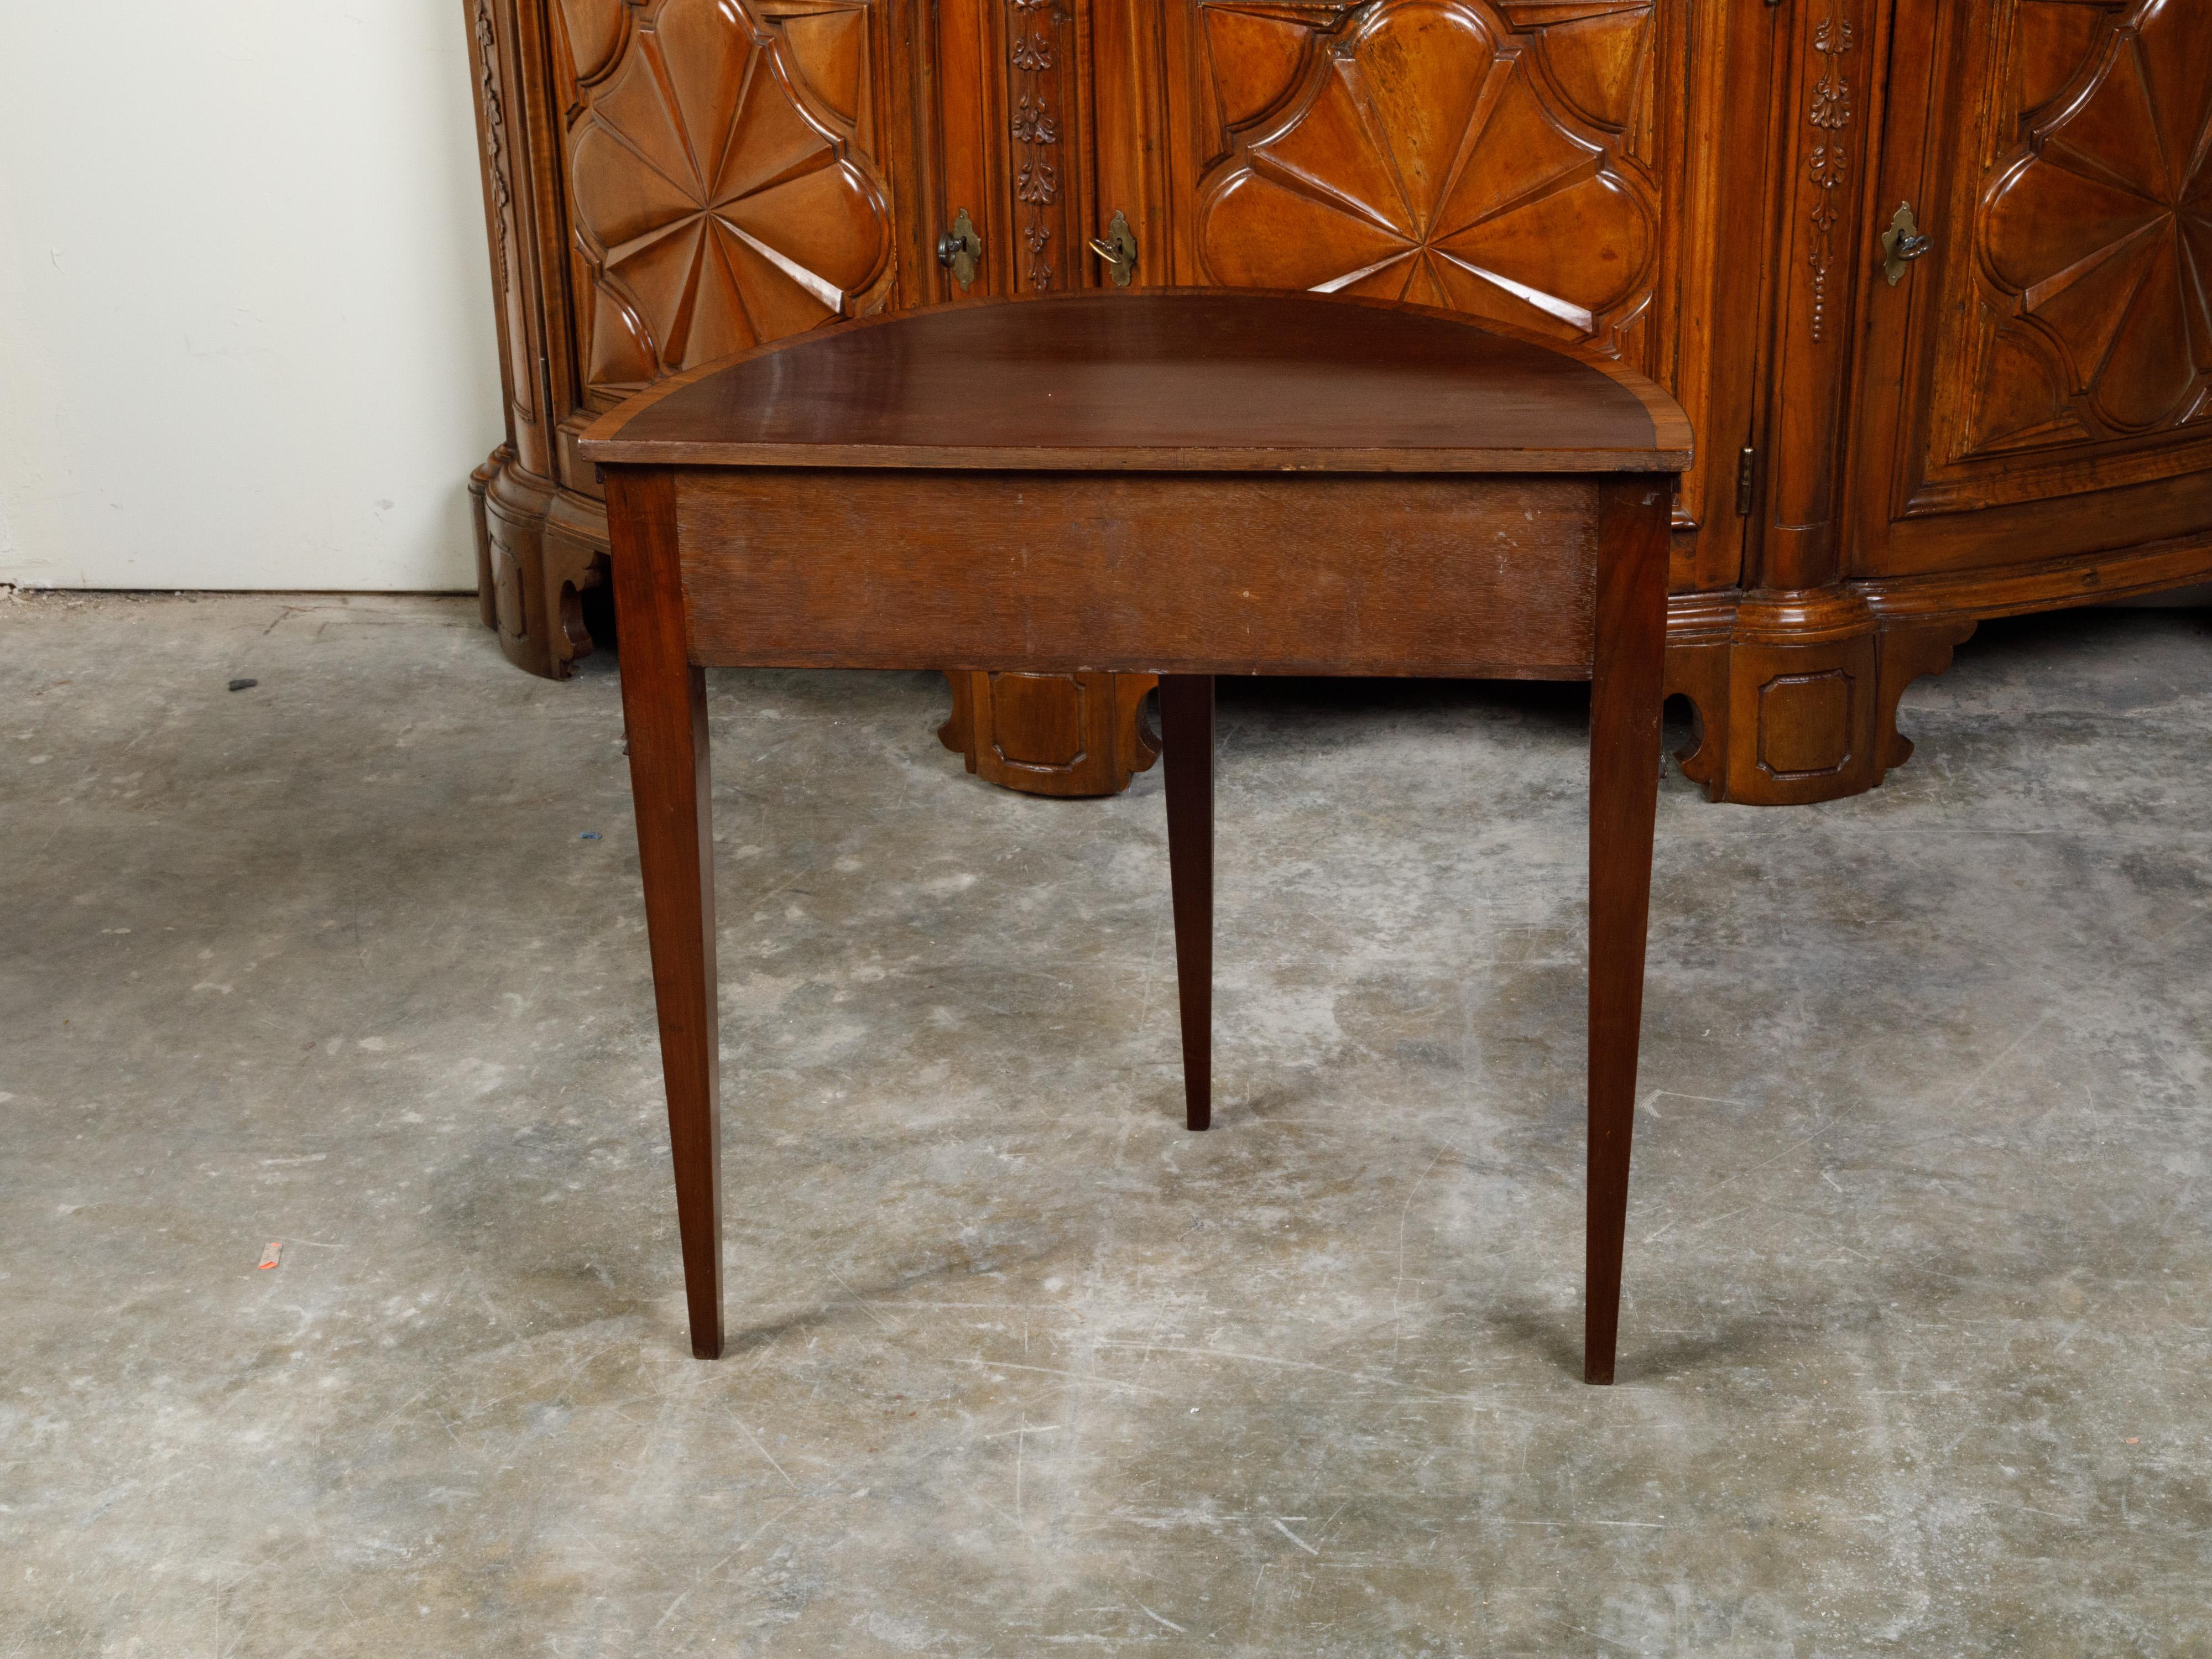 English Mahogany 19th Century Demi-Lune Console Table with Tambour Sliding Doors For Sale 6